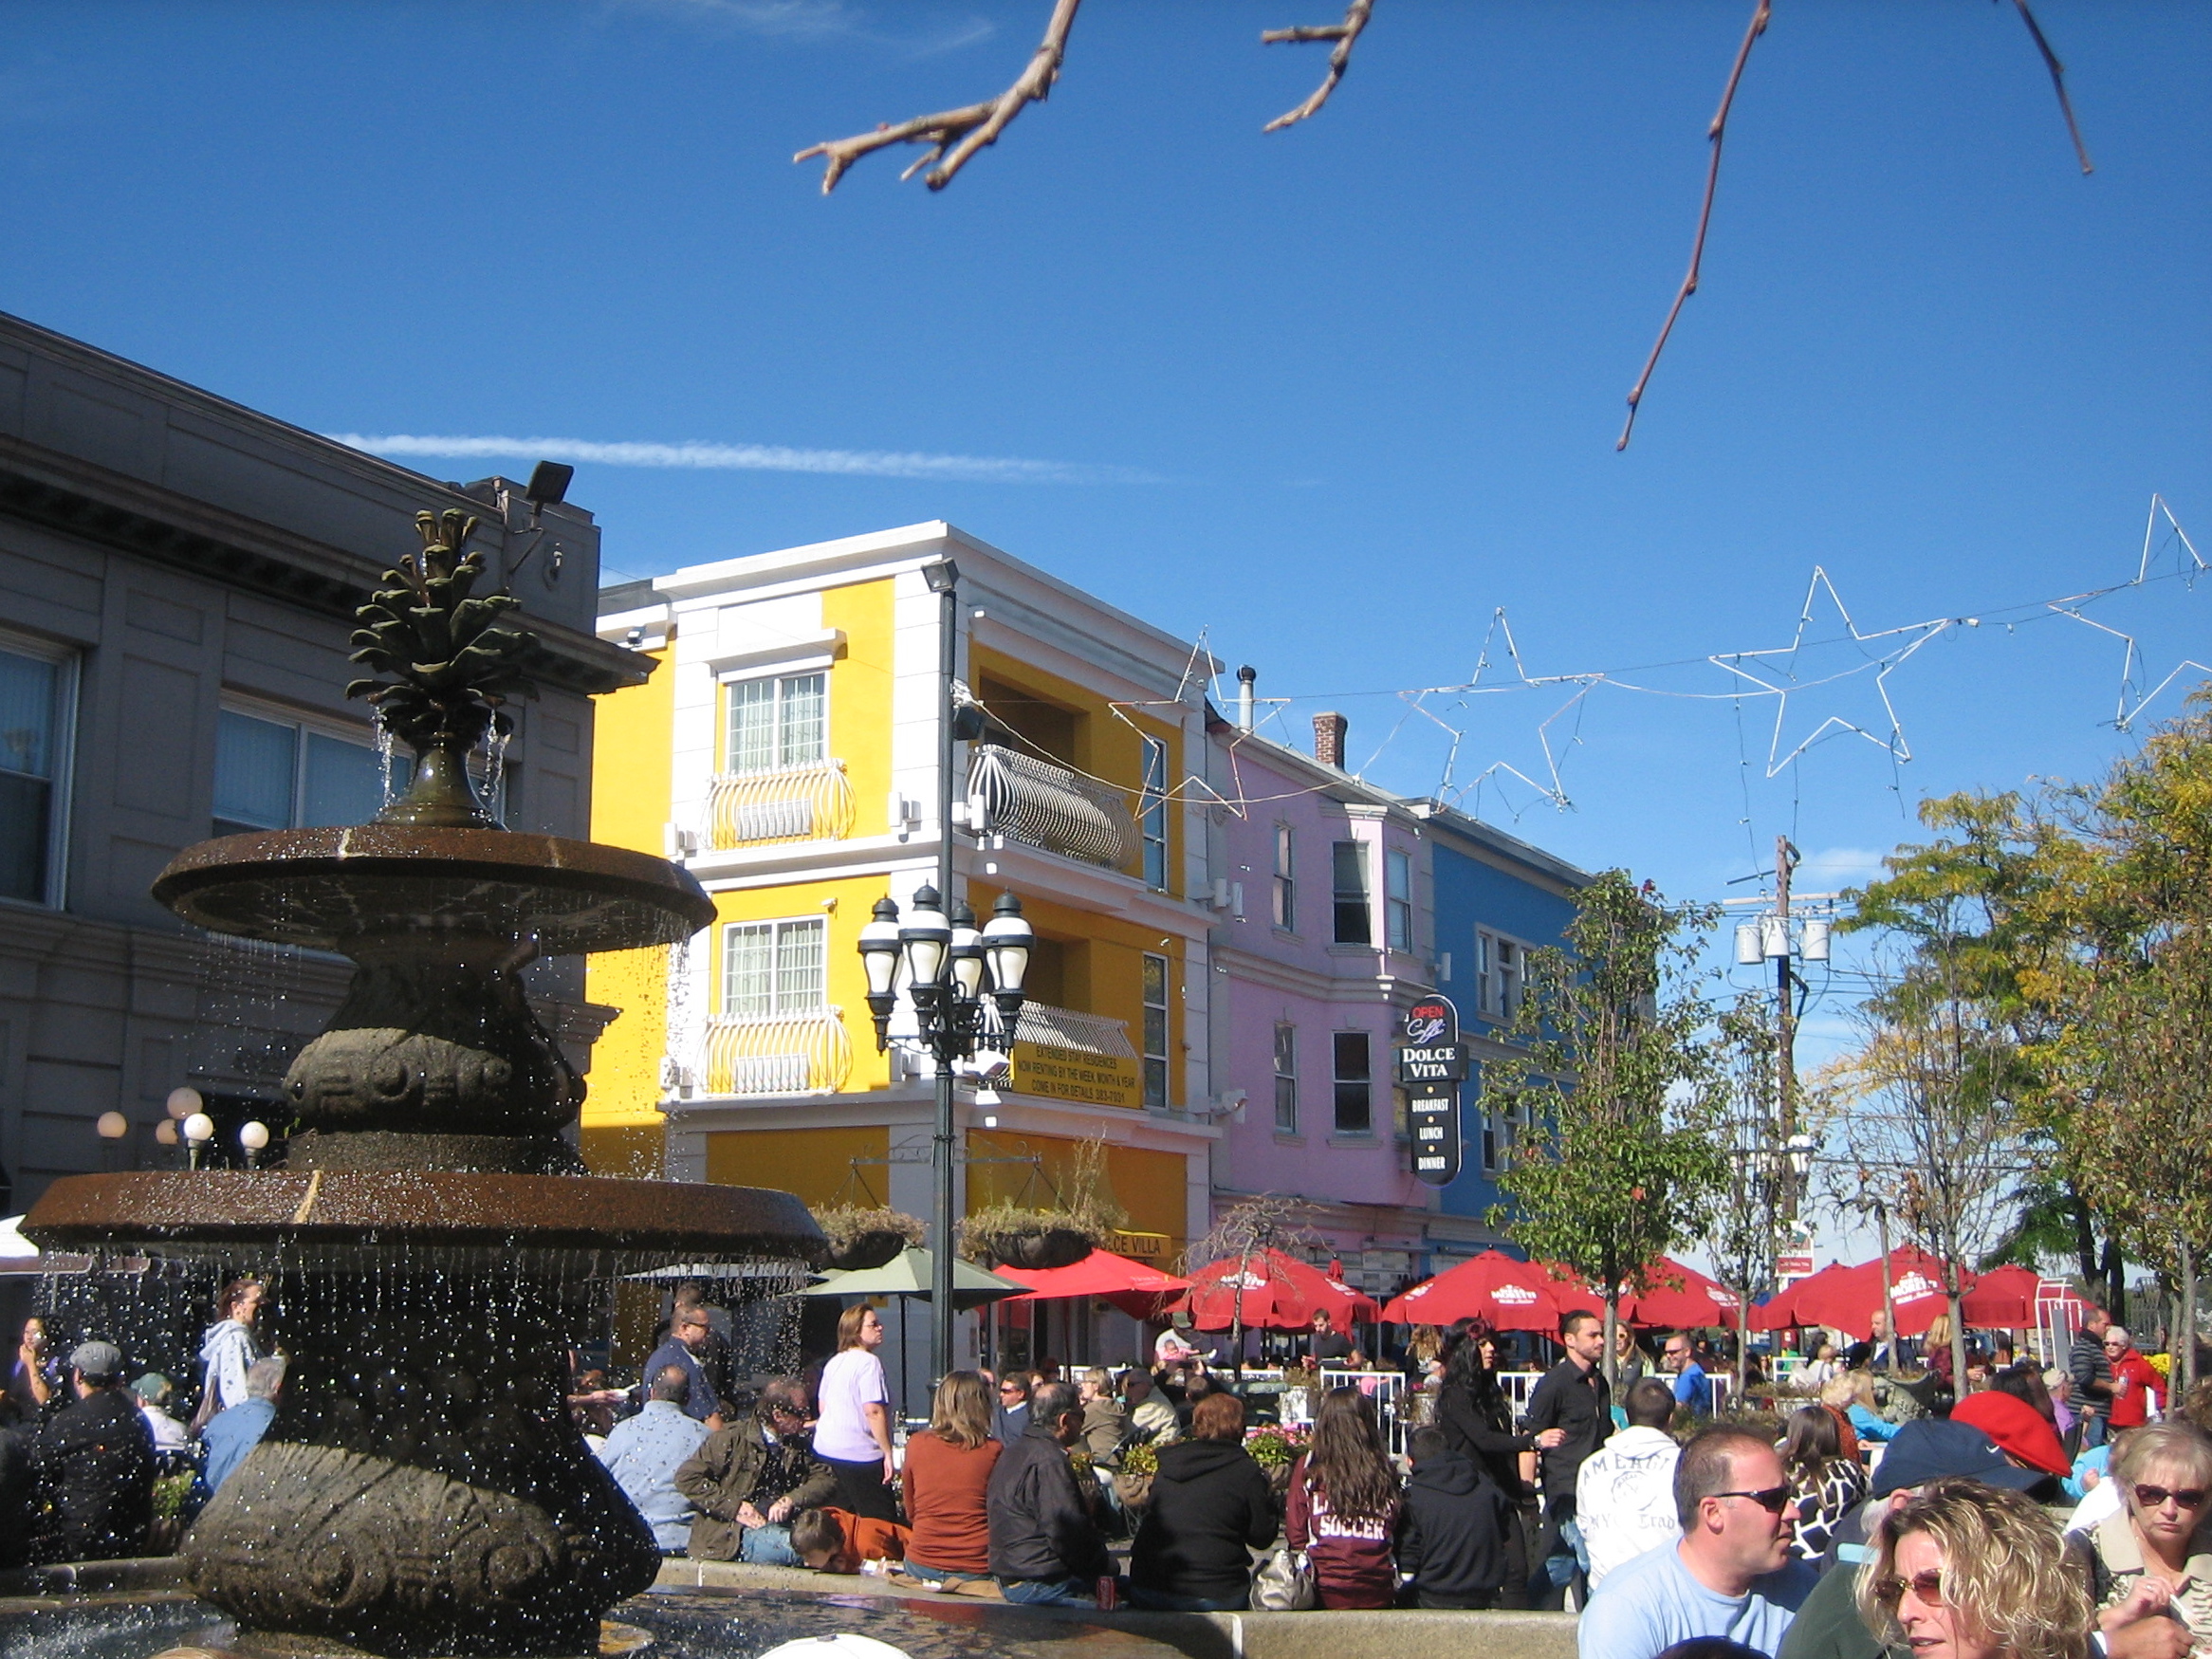 DePasquale Square, Federal Hill in Providence